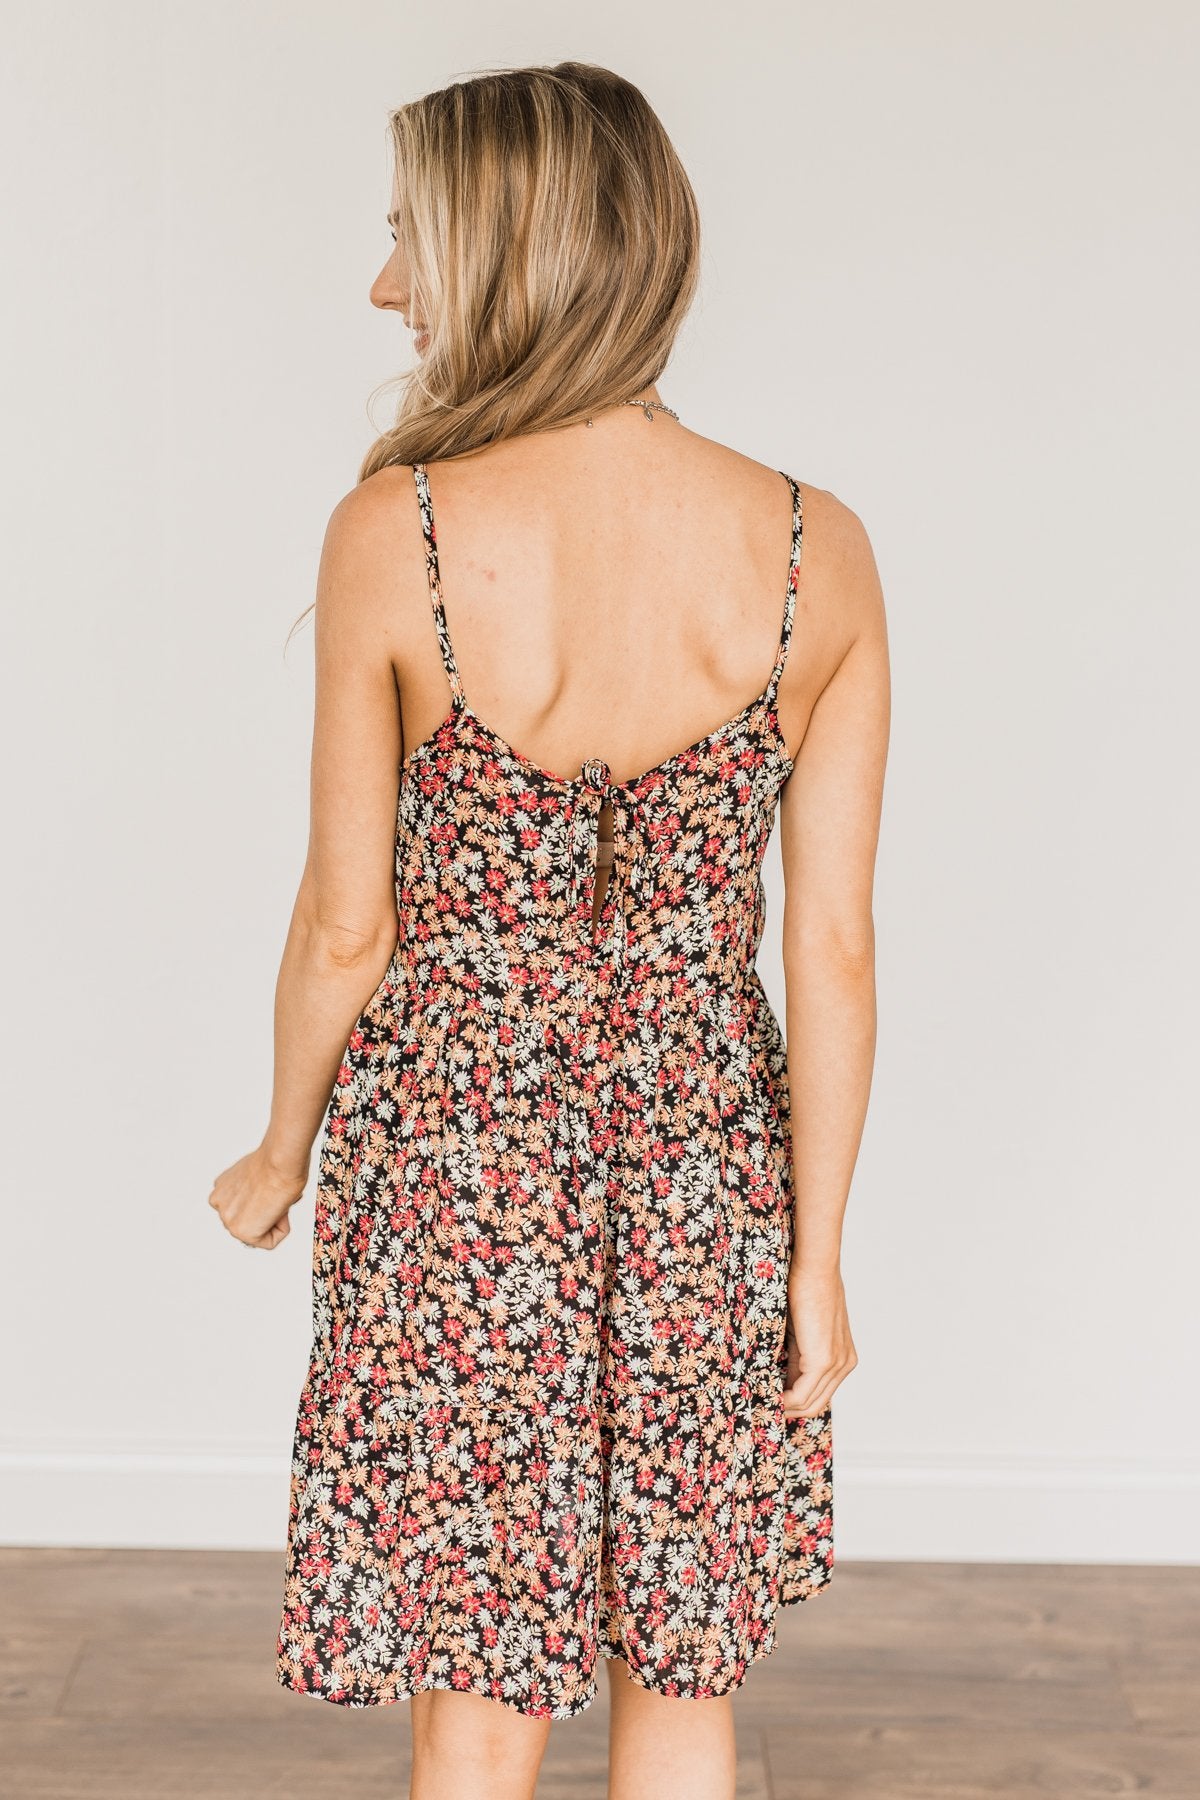 Born To Stand Out Floral Dress- Black & Multi-Color